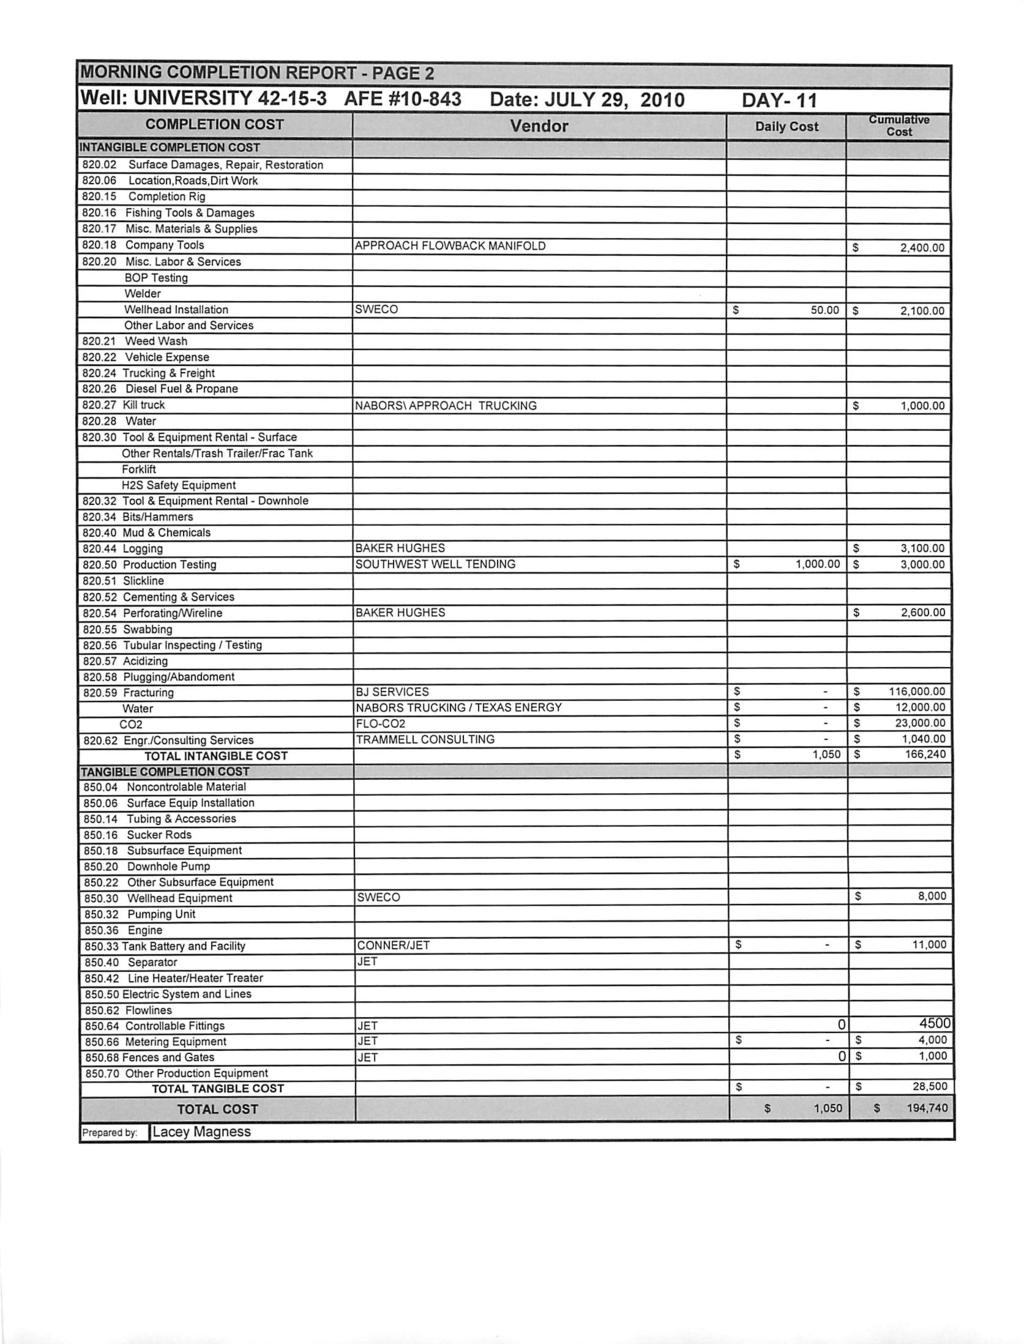 MORNING COMPLETION REPORT - PAGE 2 Well: UNIVERSITY 42-15-3 AFE #10-843 Date: JULY 29, 2010 DAY-11 COMPLETION COST Vendor Daily Cost INTANGIBLE COMPLETION COST 820.